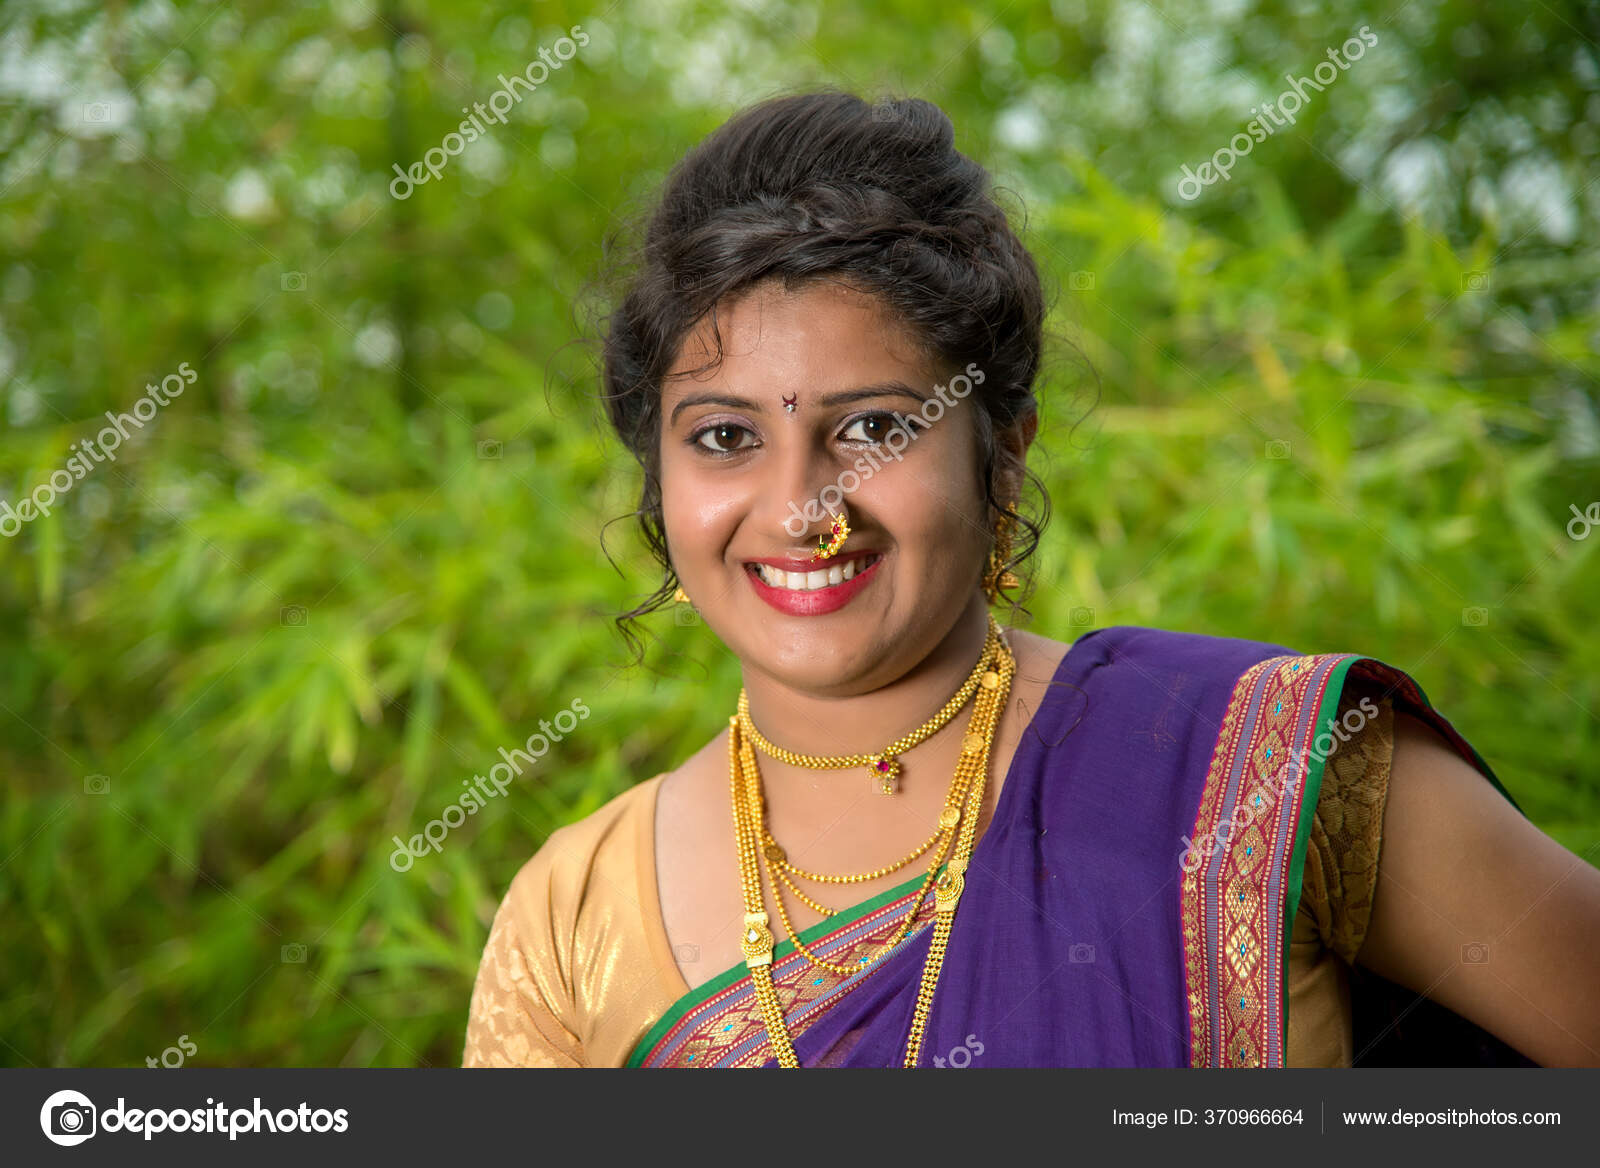 Image of Indian traditional Beautiful Woman Wearing an traditional Saree  And Posing On The Outdoor With a Smile Face-JA674305-Picxy